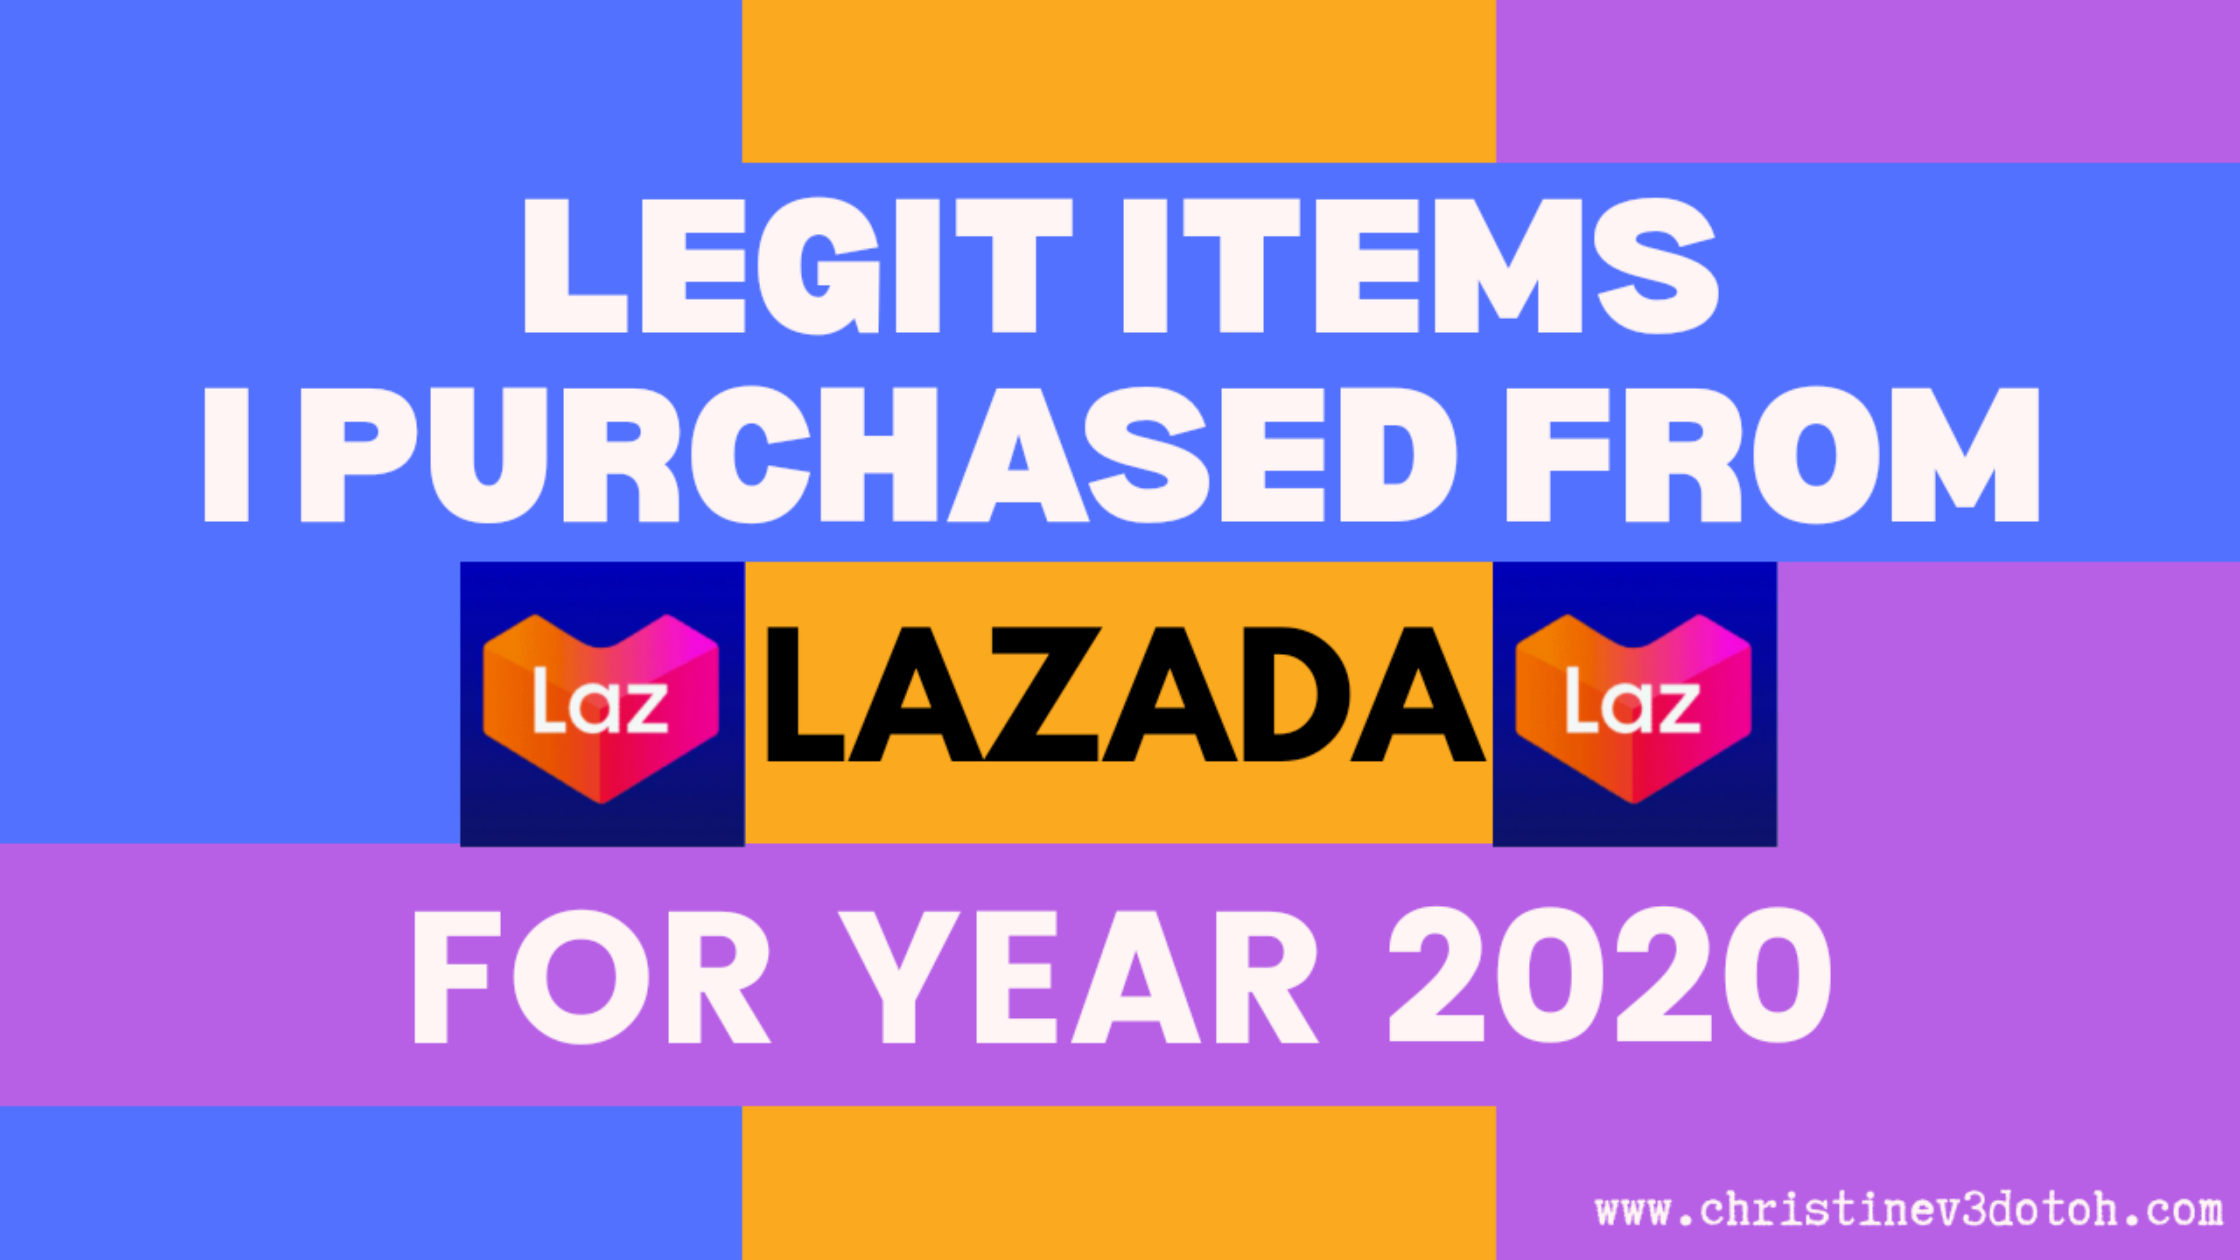 Legit Items I Purchased from Lazada for Year 2020